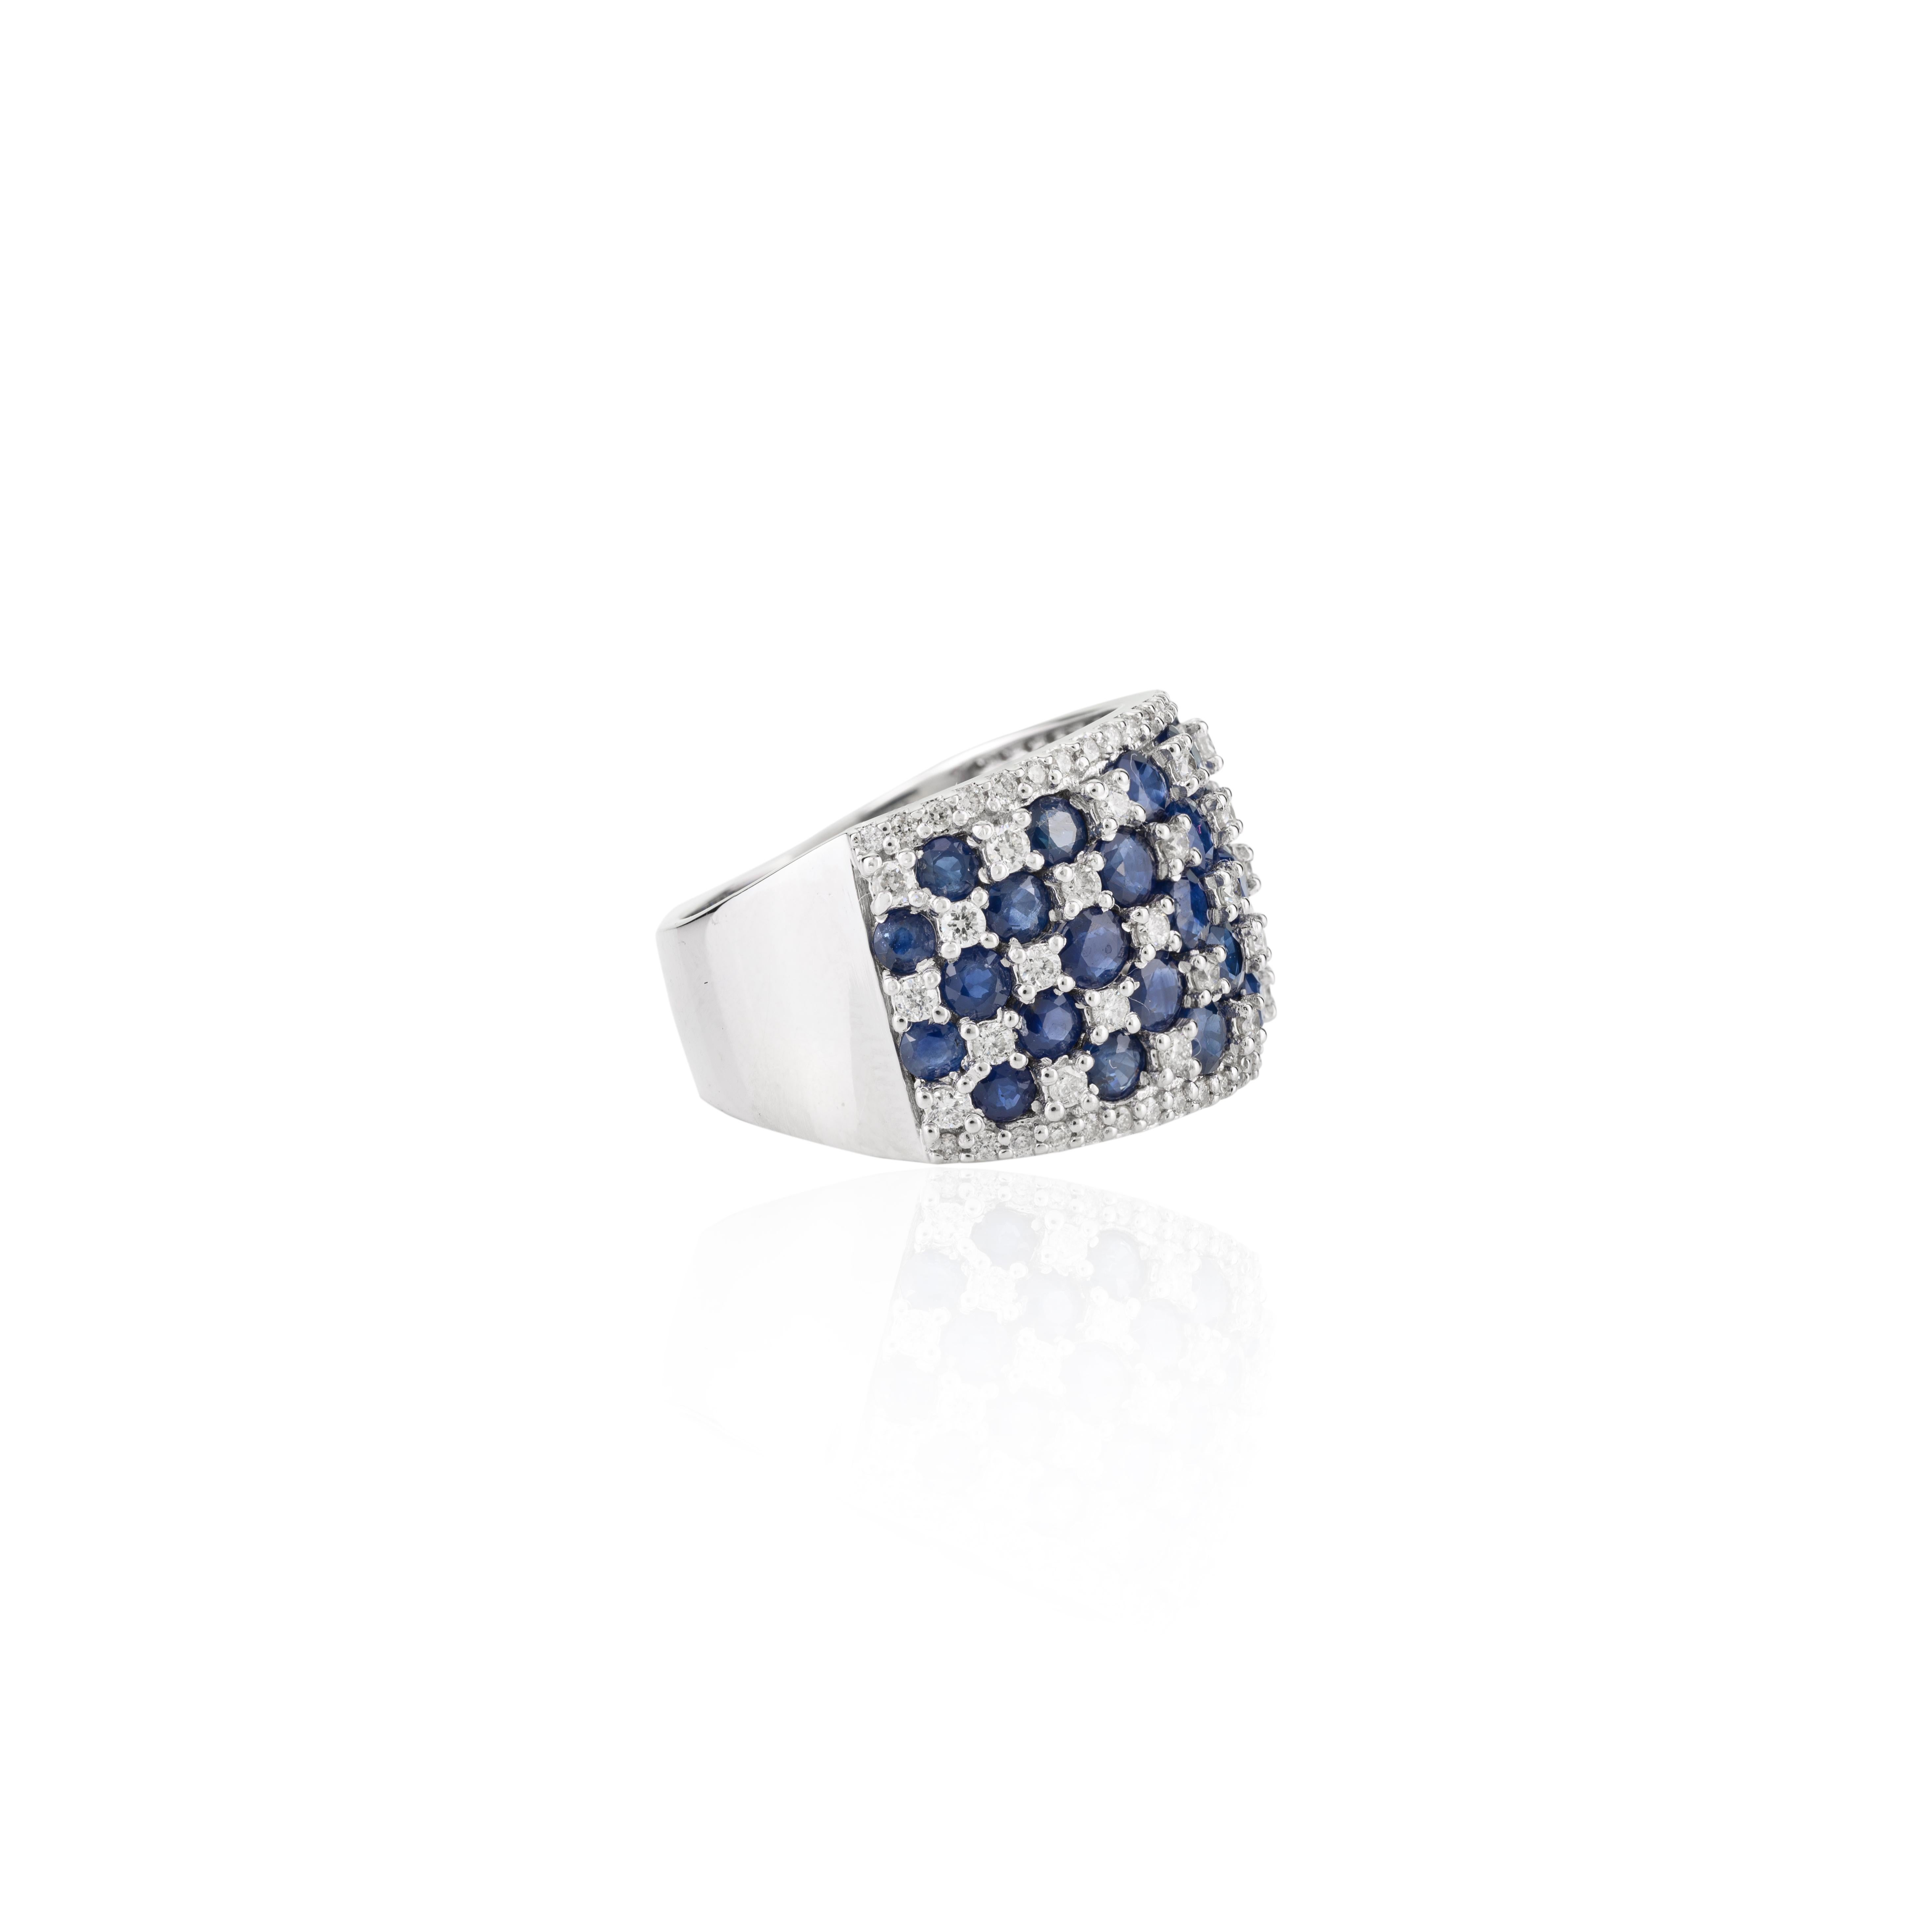 For Sale:  Stunning 4.11 CTW Sapphire Diamond Wide Cocktail Band Ring in 18k White Gold 7